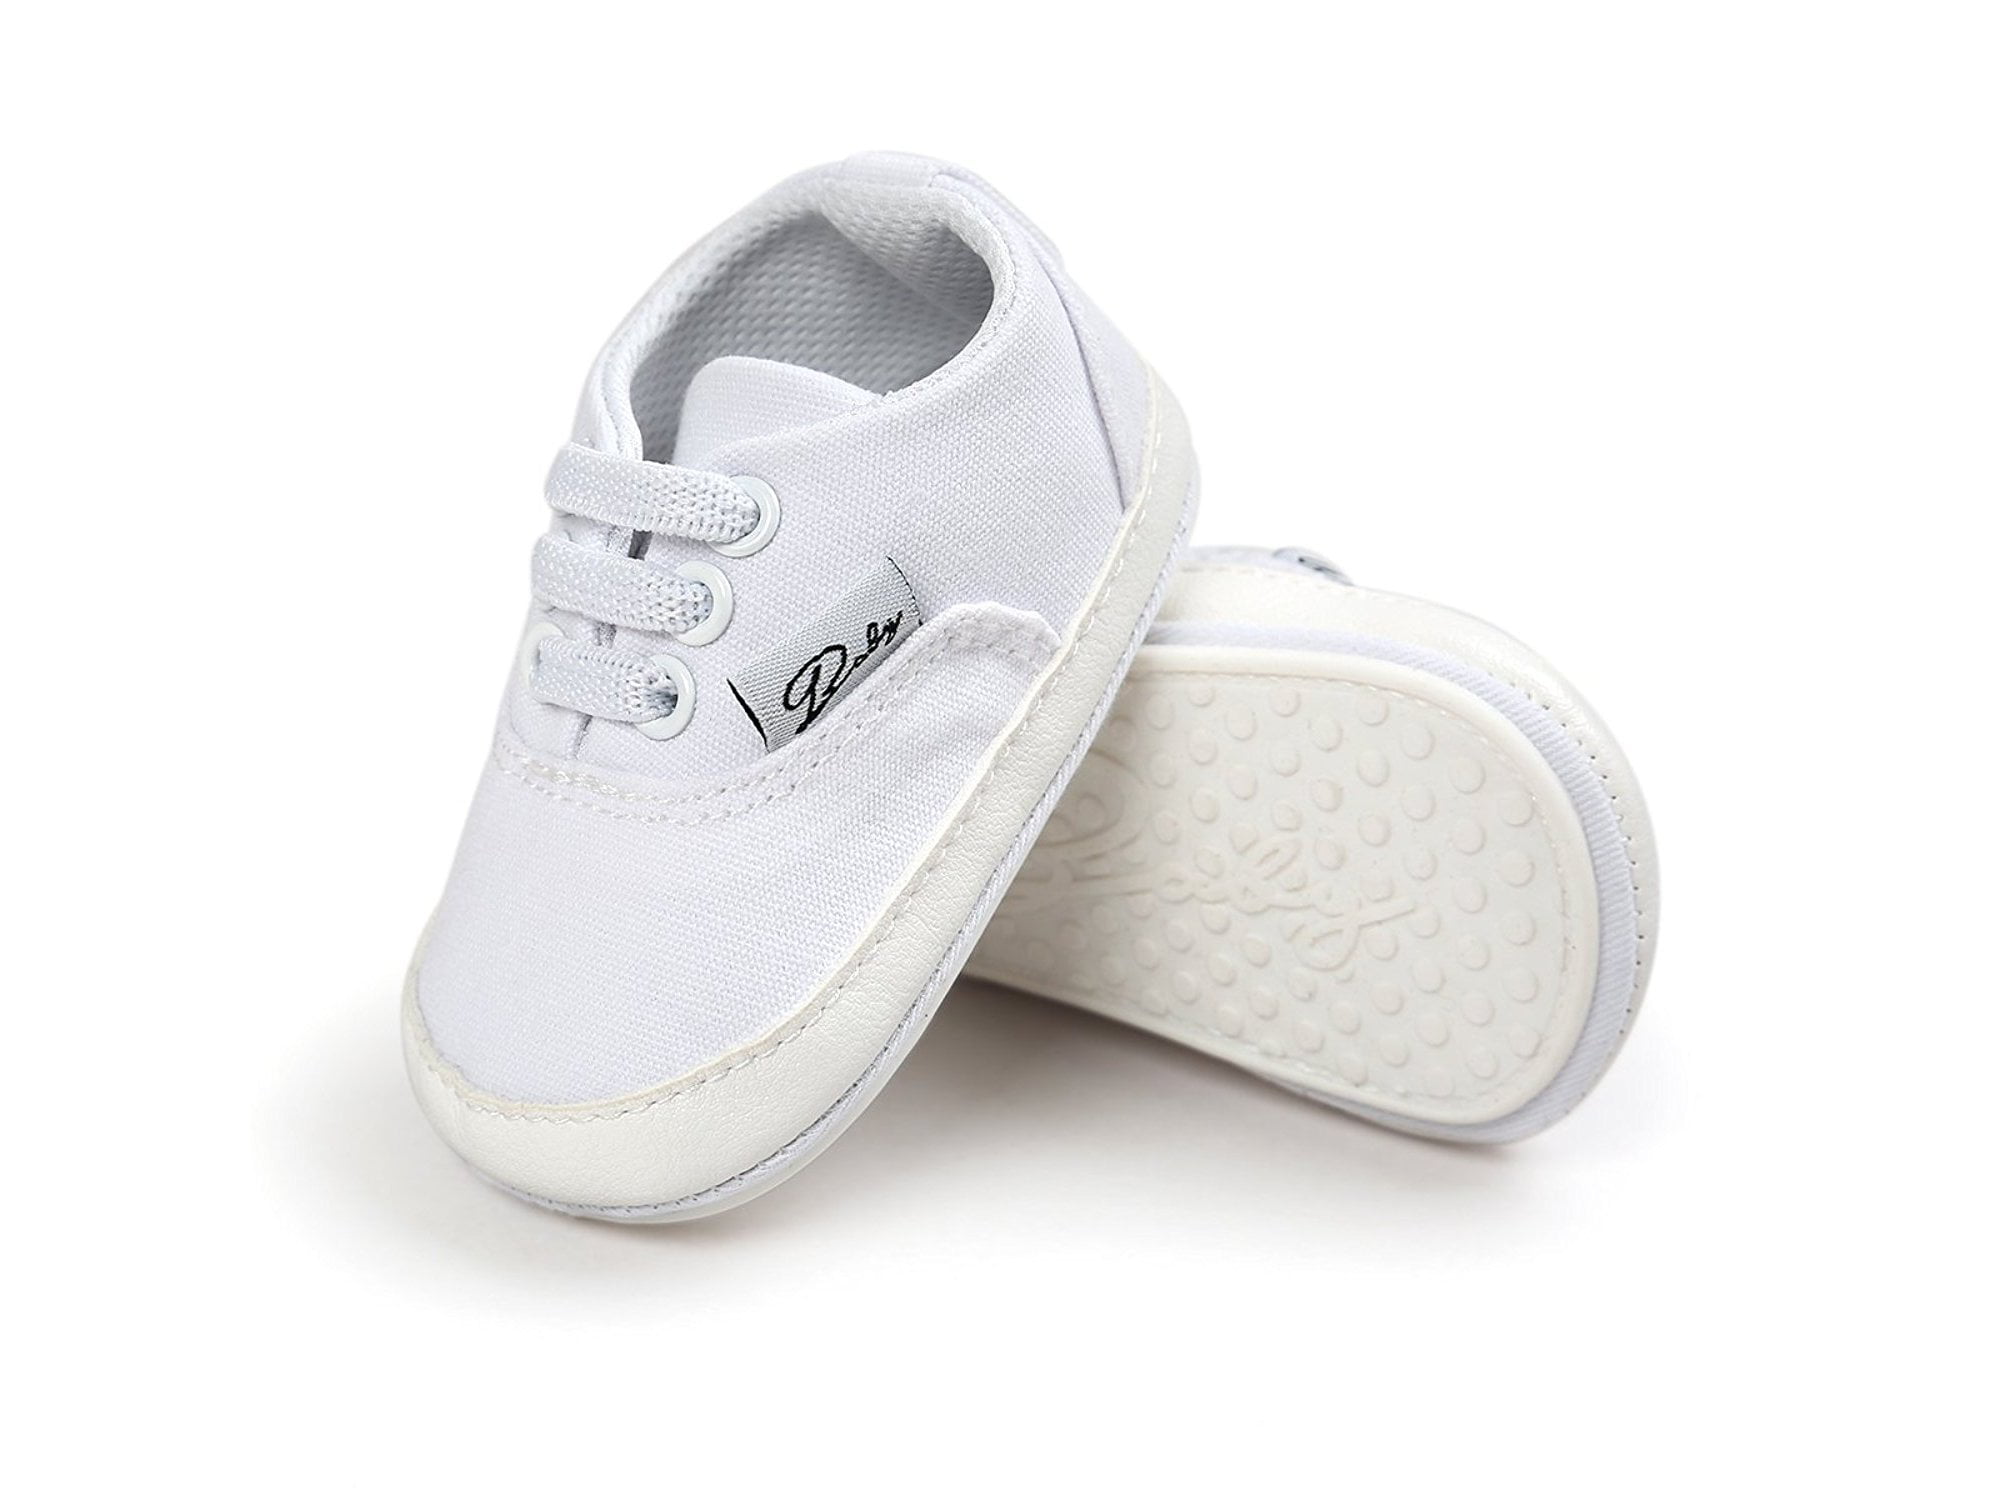 RVROVIC Baby Boys Girls Shoes Canvas Toddler Sneakers Anti-Slip Infant First Walkers 0-18 Months